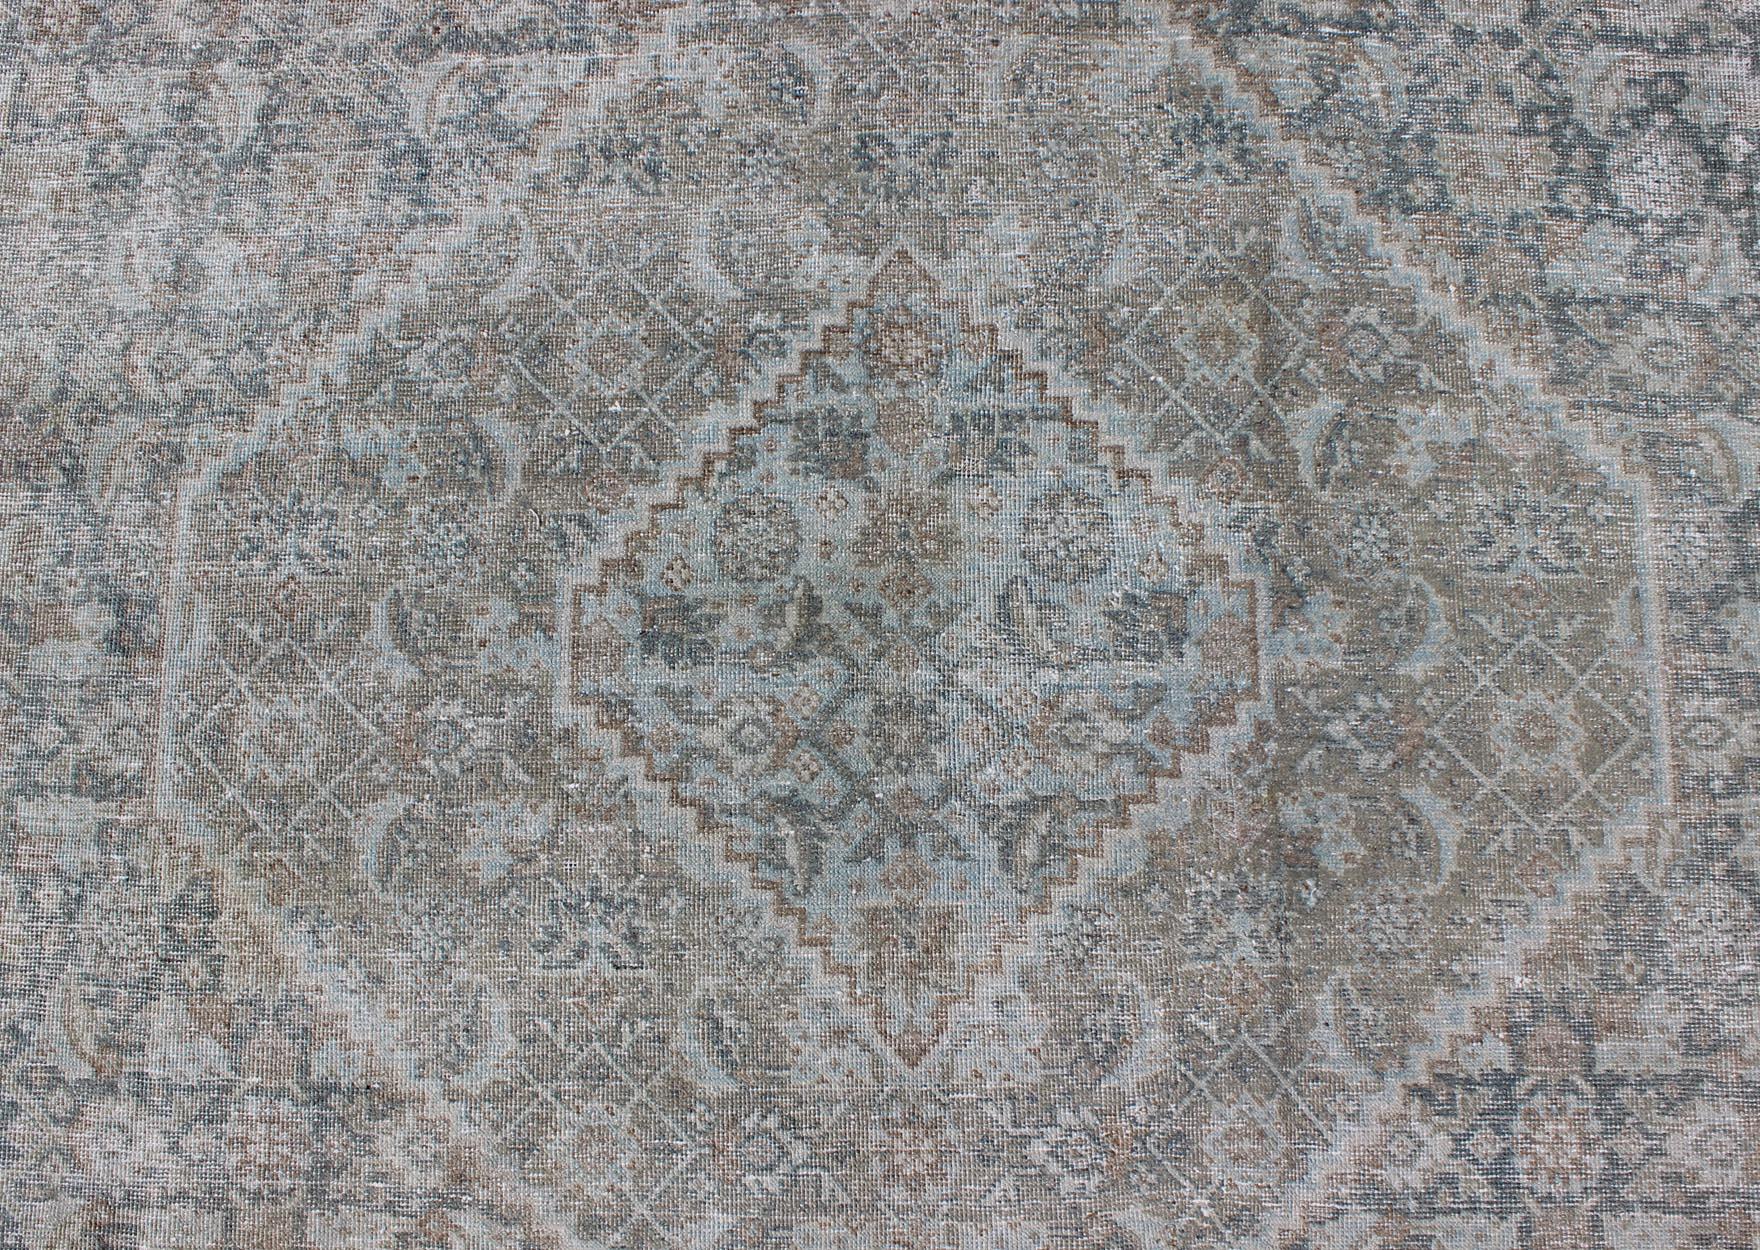 Antique Persian Tabriz Rug in Muted Colors with Layered Medallion Design 6